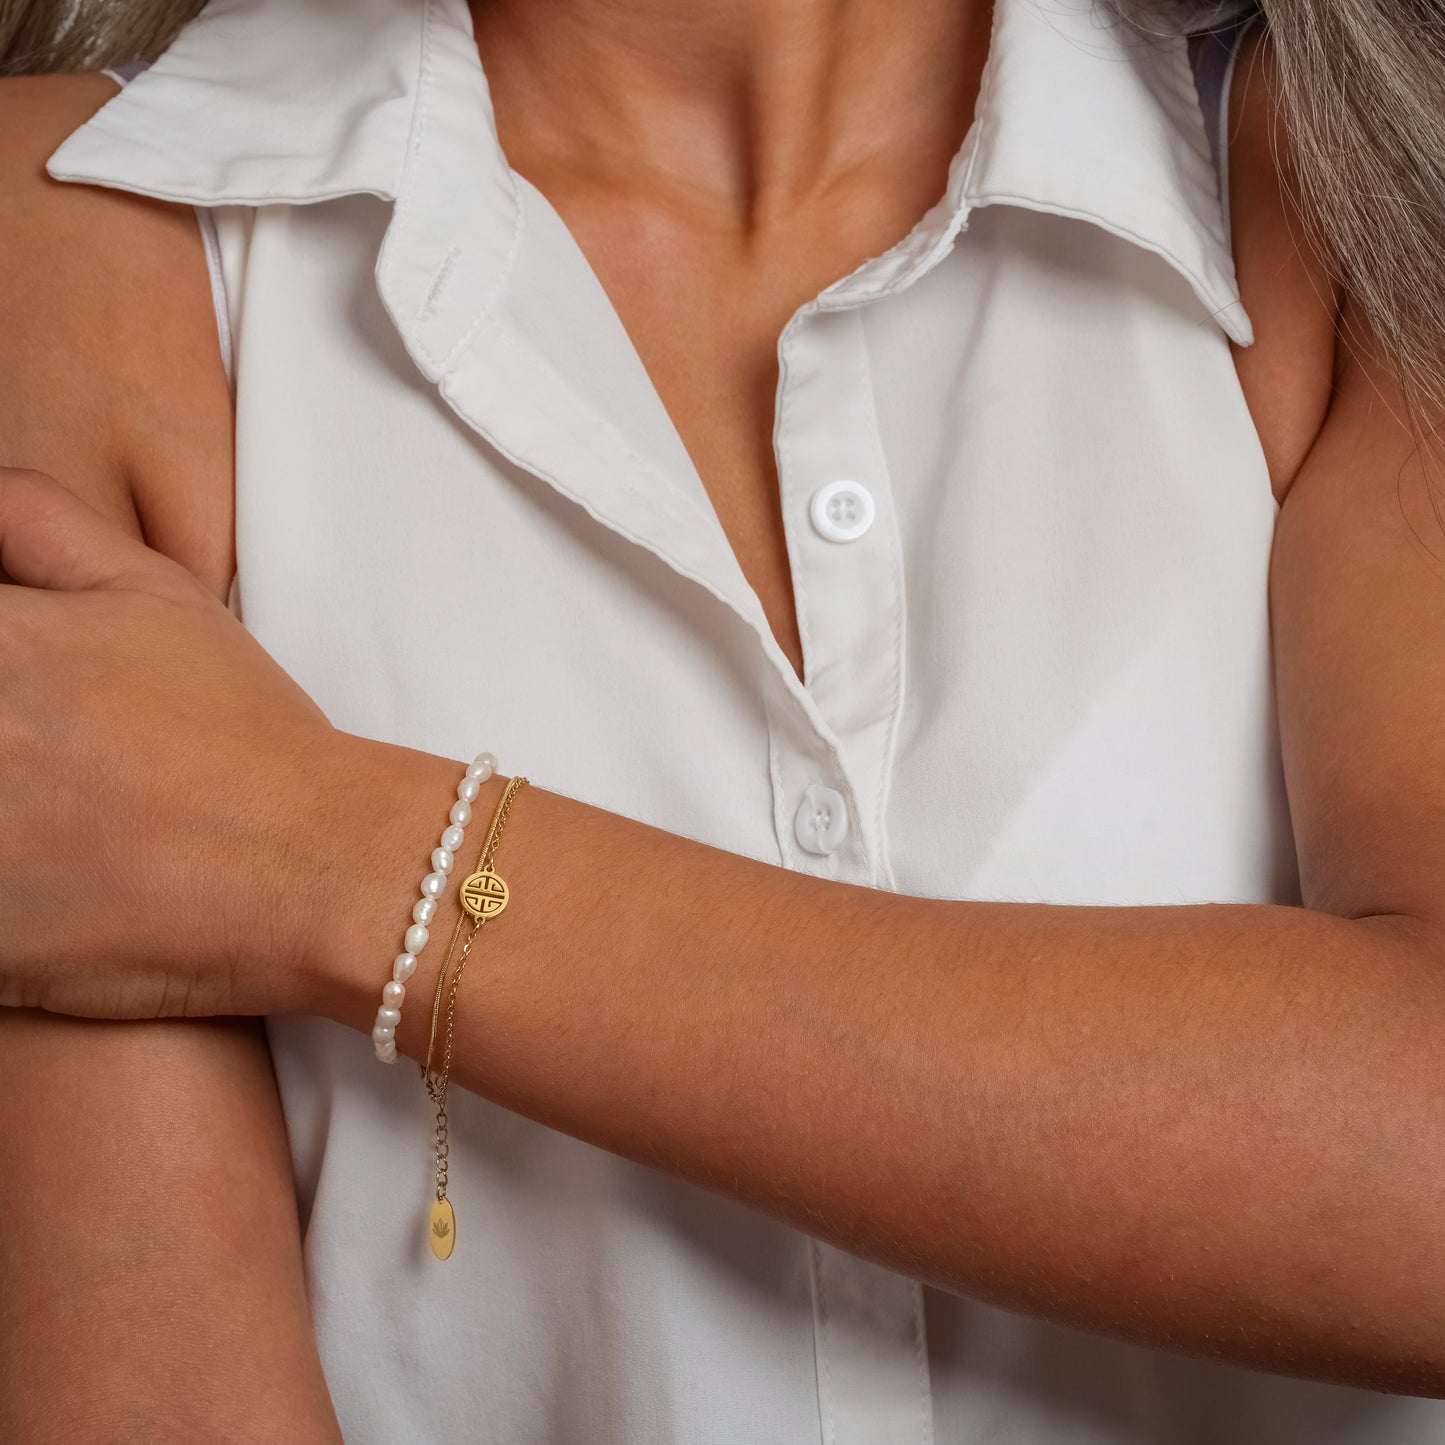 A model in a white sleeveless shirt wearing Lucky Pendant Pearl bracelet on her wrist.